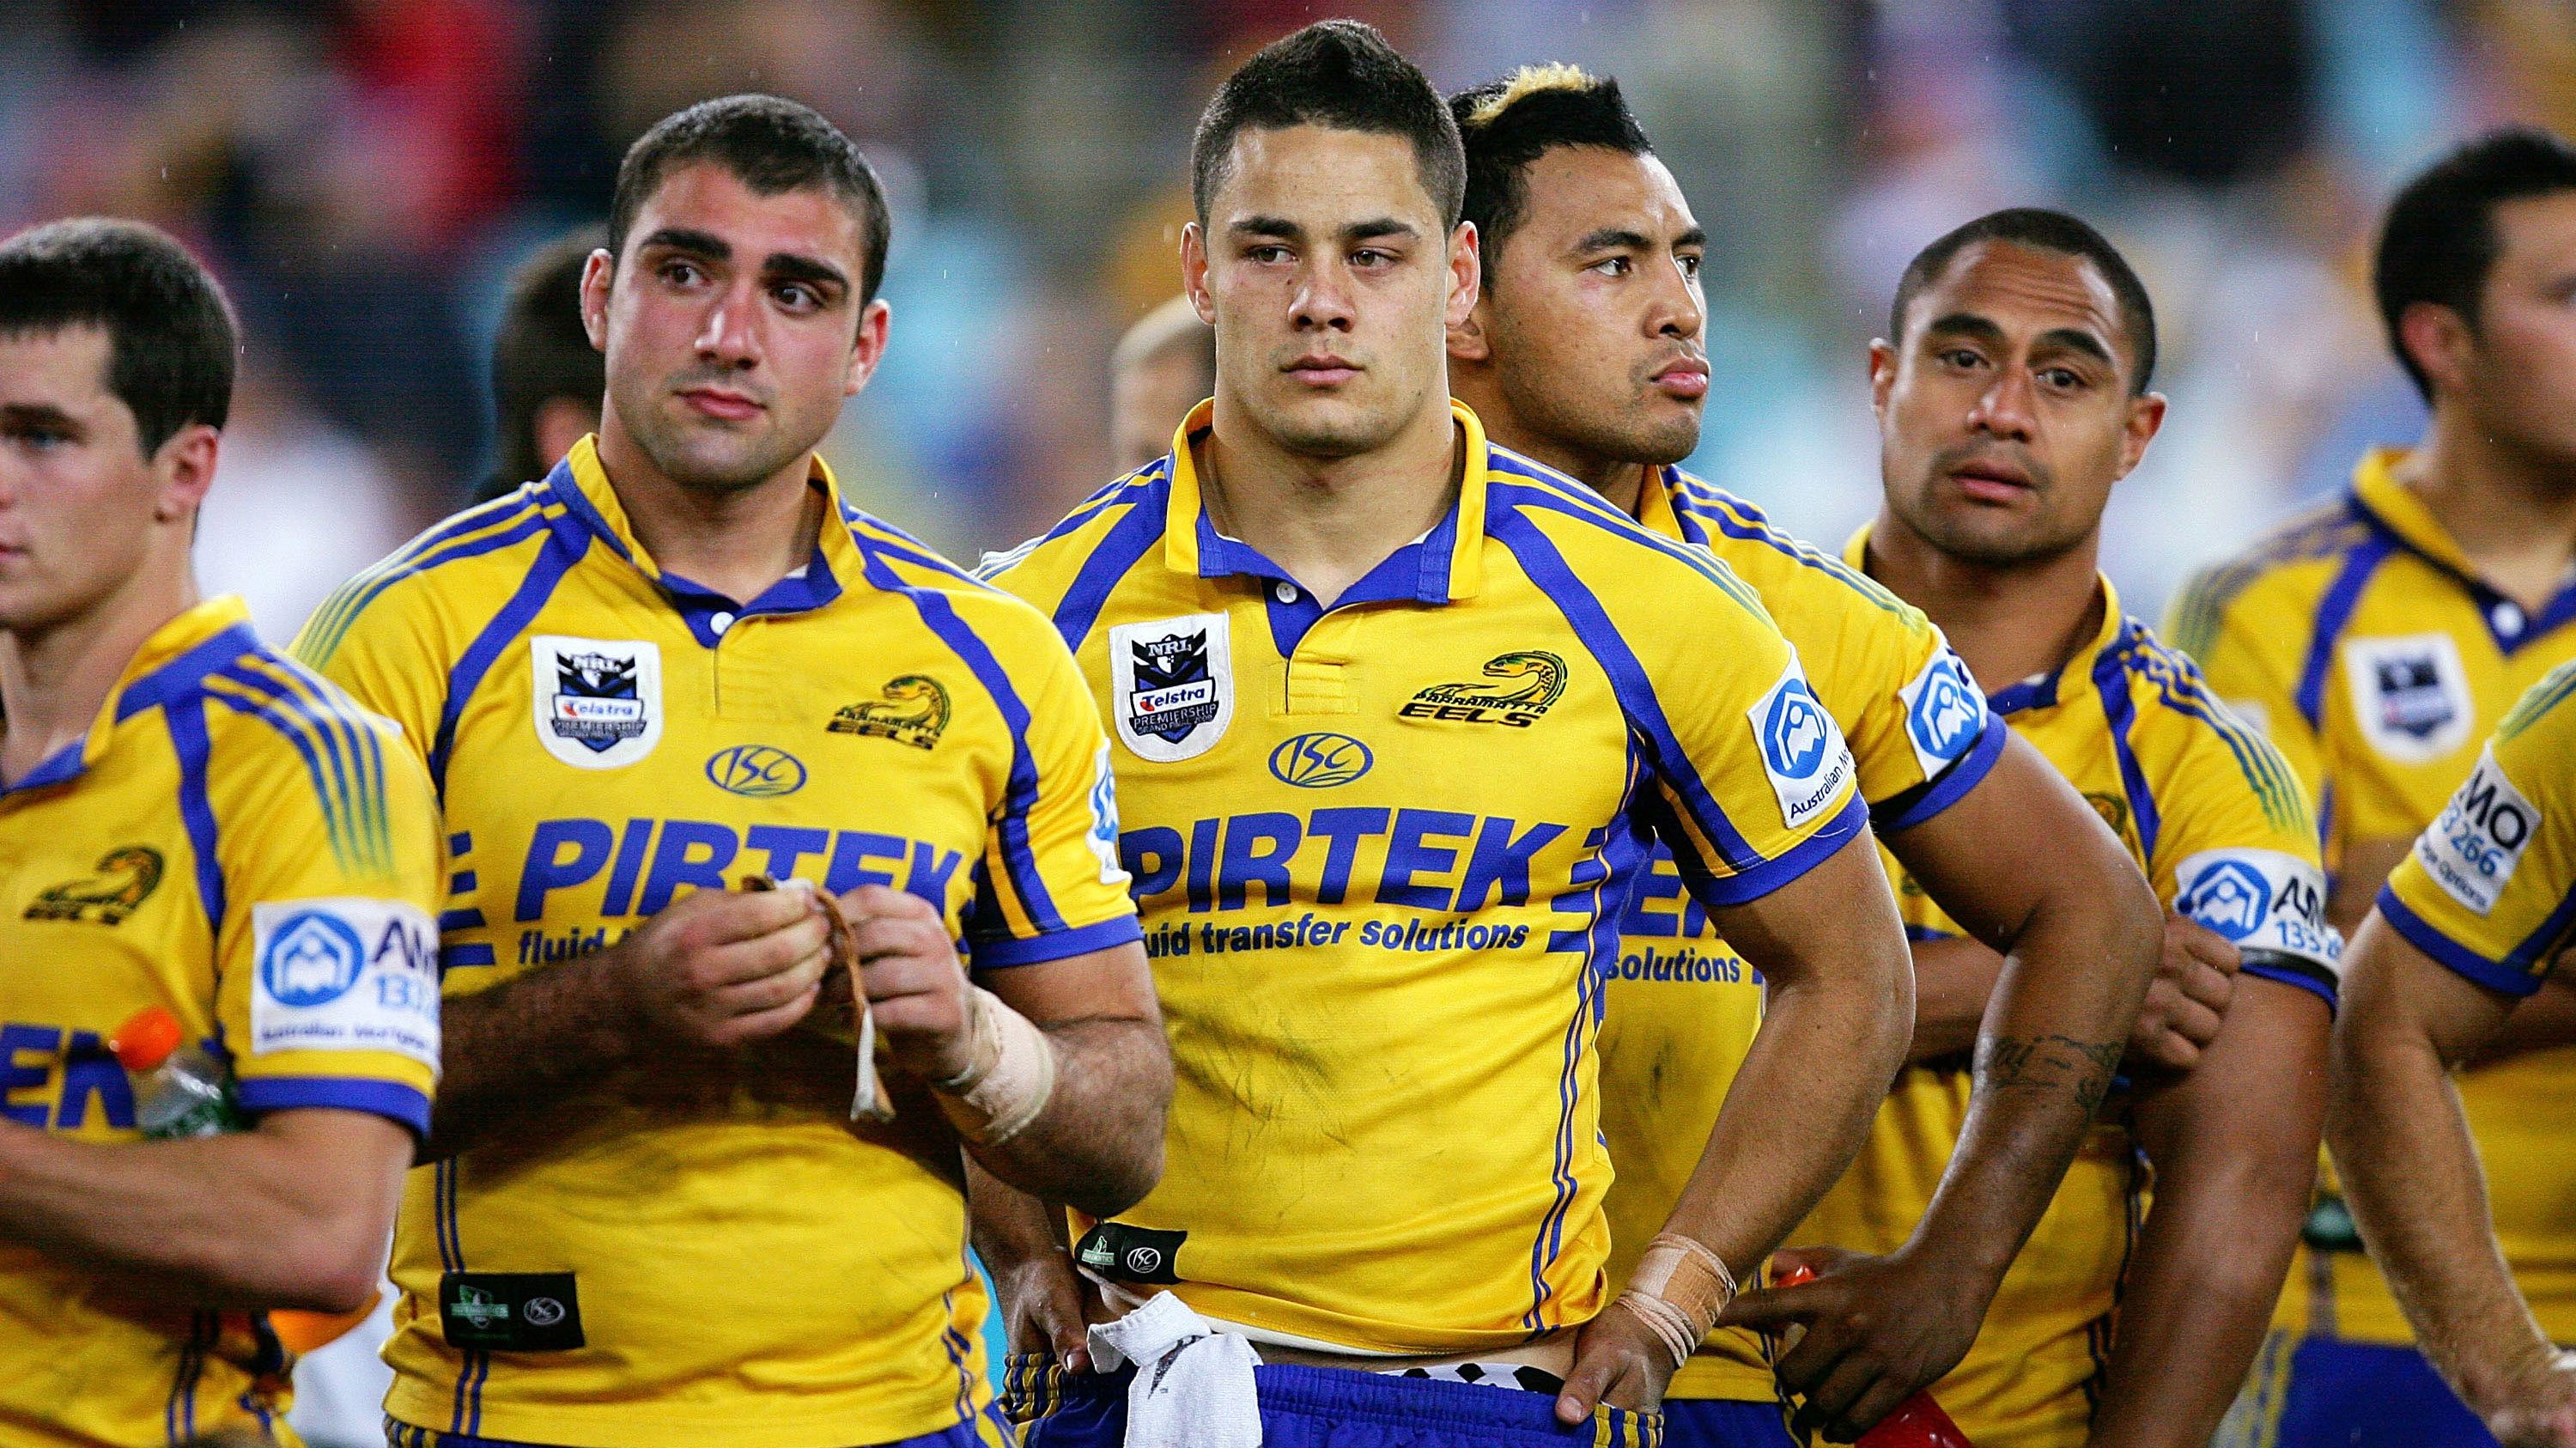 Jarryd Hayne and Eels teammates cut devastated figures after their 2009 grand final loss to the Storm.